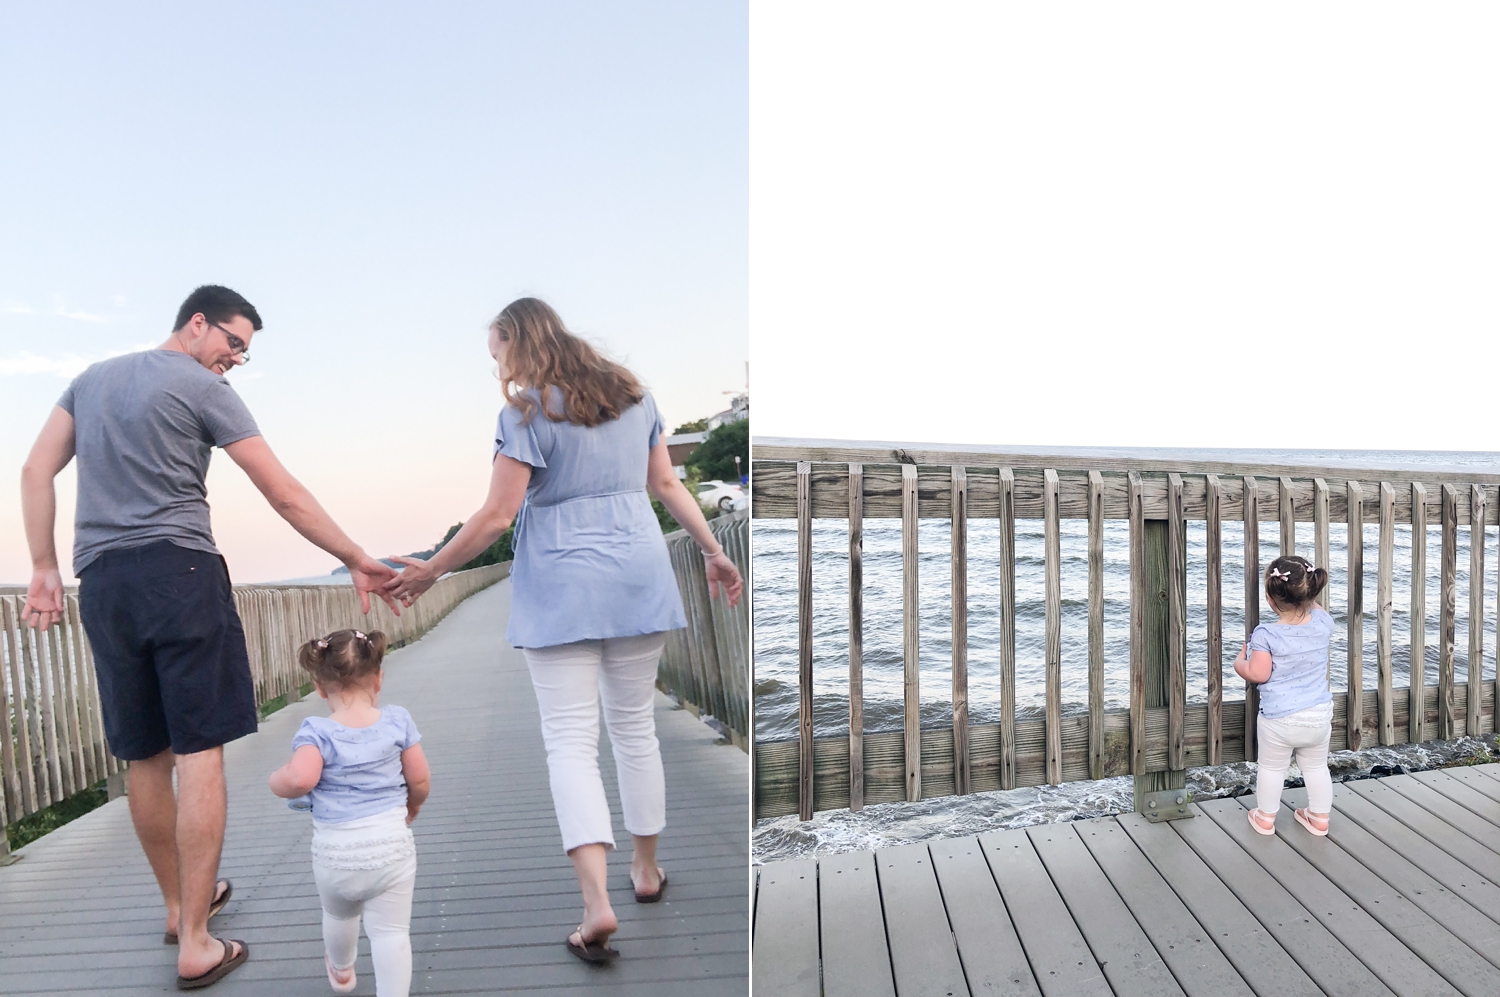  The last night we went out to dinner and walked on the boardwalk. Payton loved running on it! 